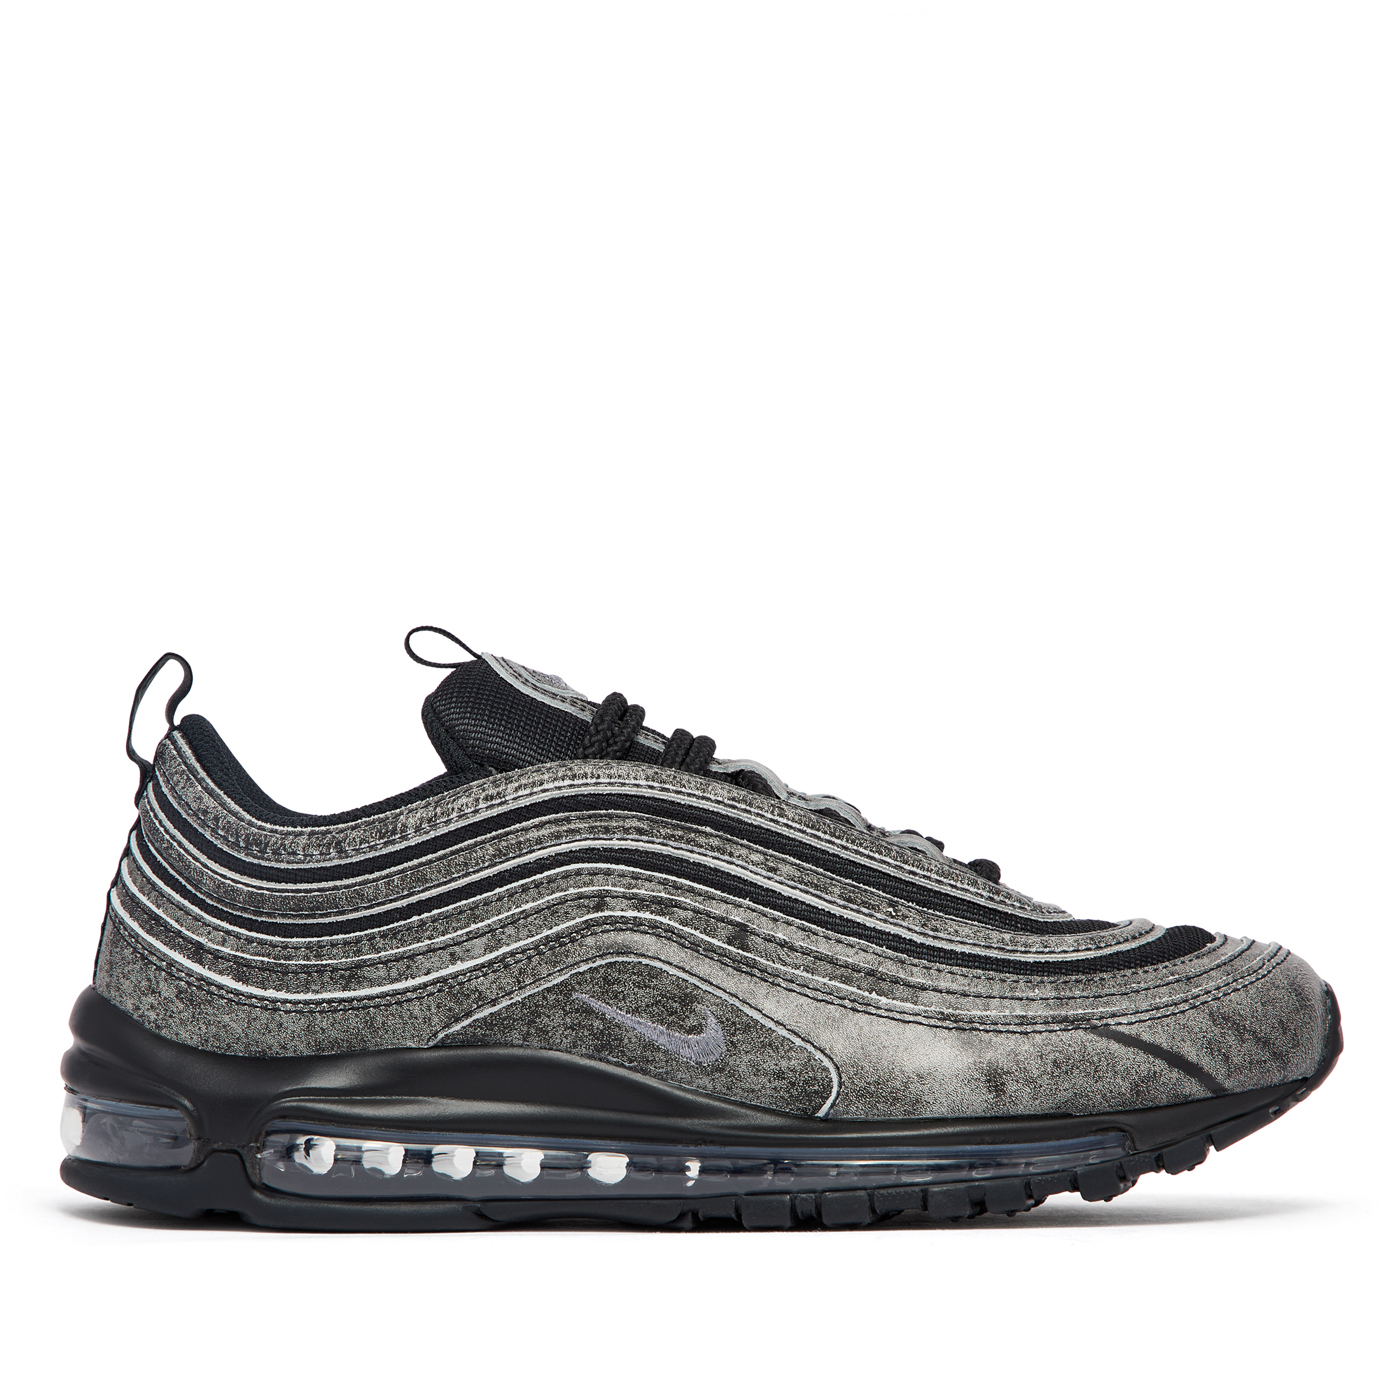 cdg-nike-air-max-97-release-information (10)